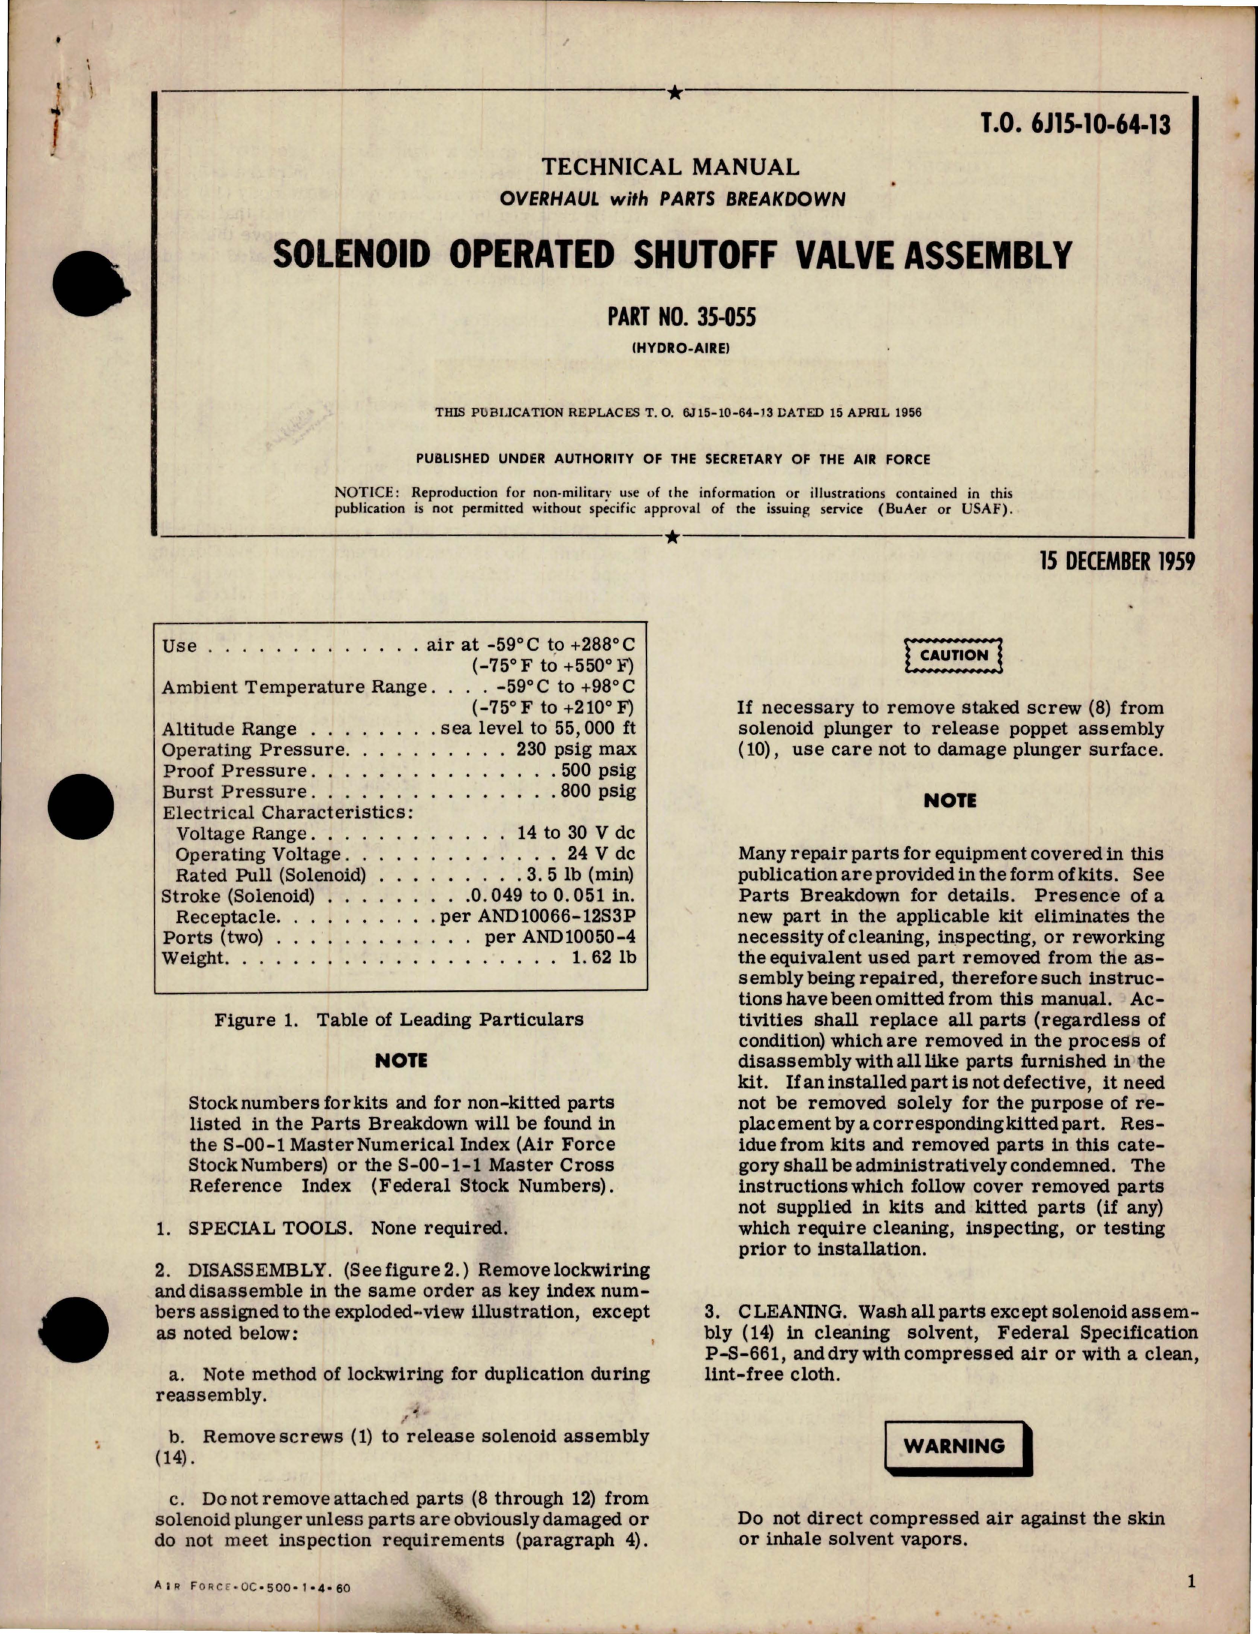 Sample page 1 from AirCorps Library document: Overhaul with Parts Breakdown for Solenoid Operated Shutoff Valve Assembly - Part 35-055 